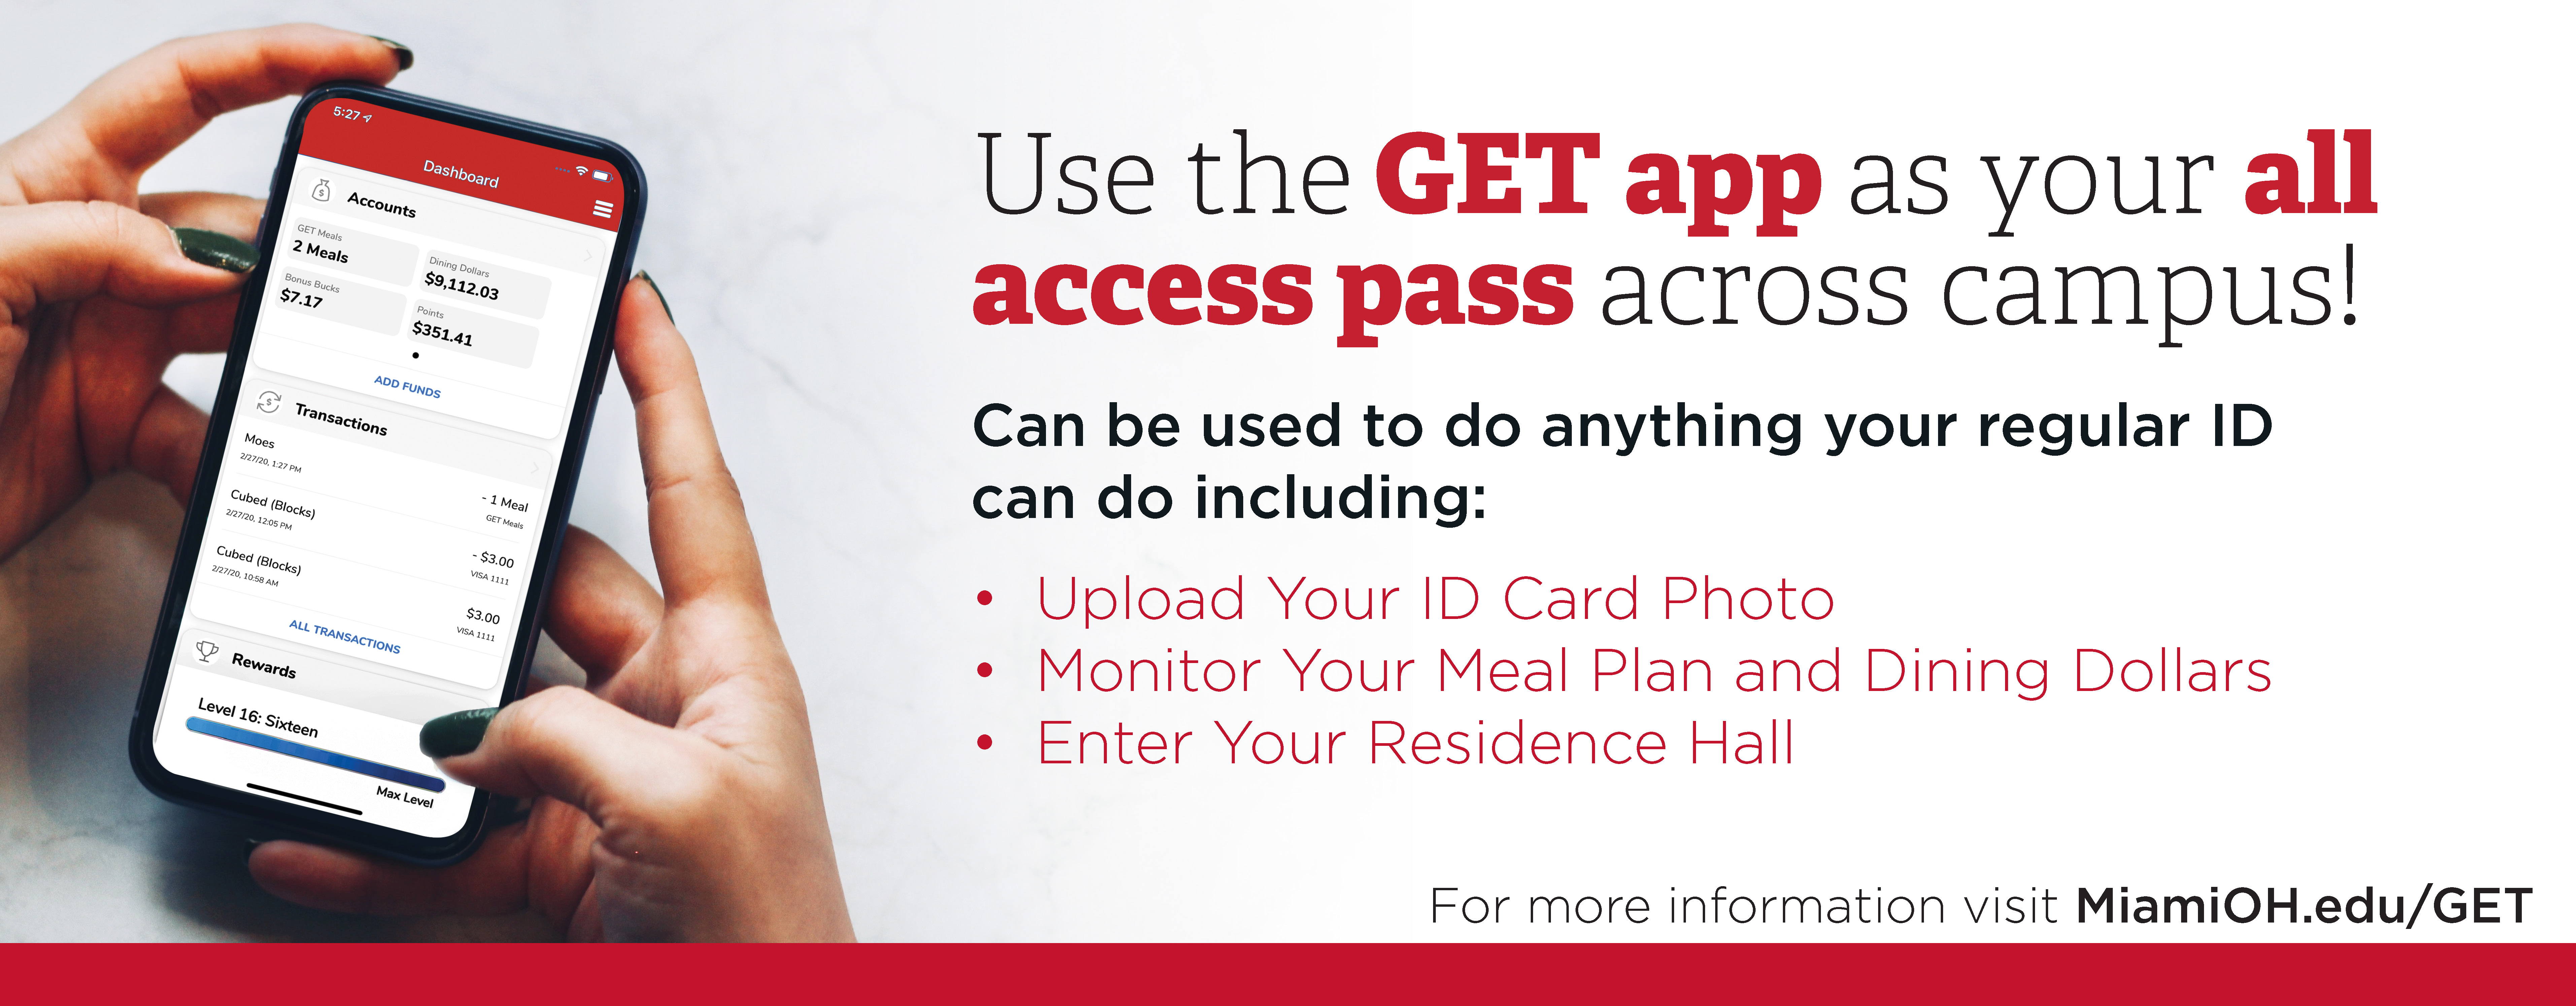 the GET app is your all-access pass around campus. It can do anything your Miami ID card can do.